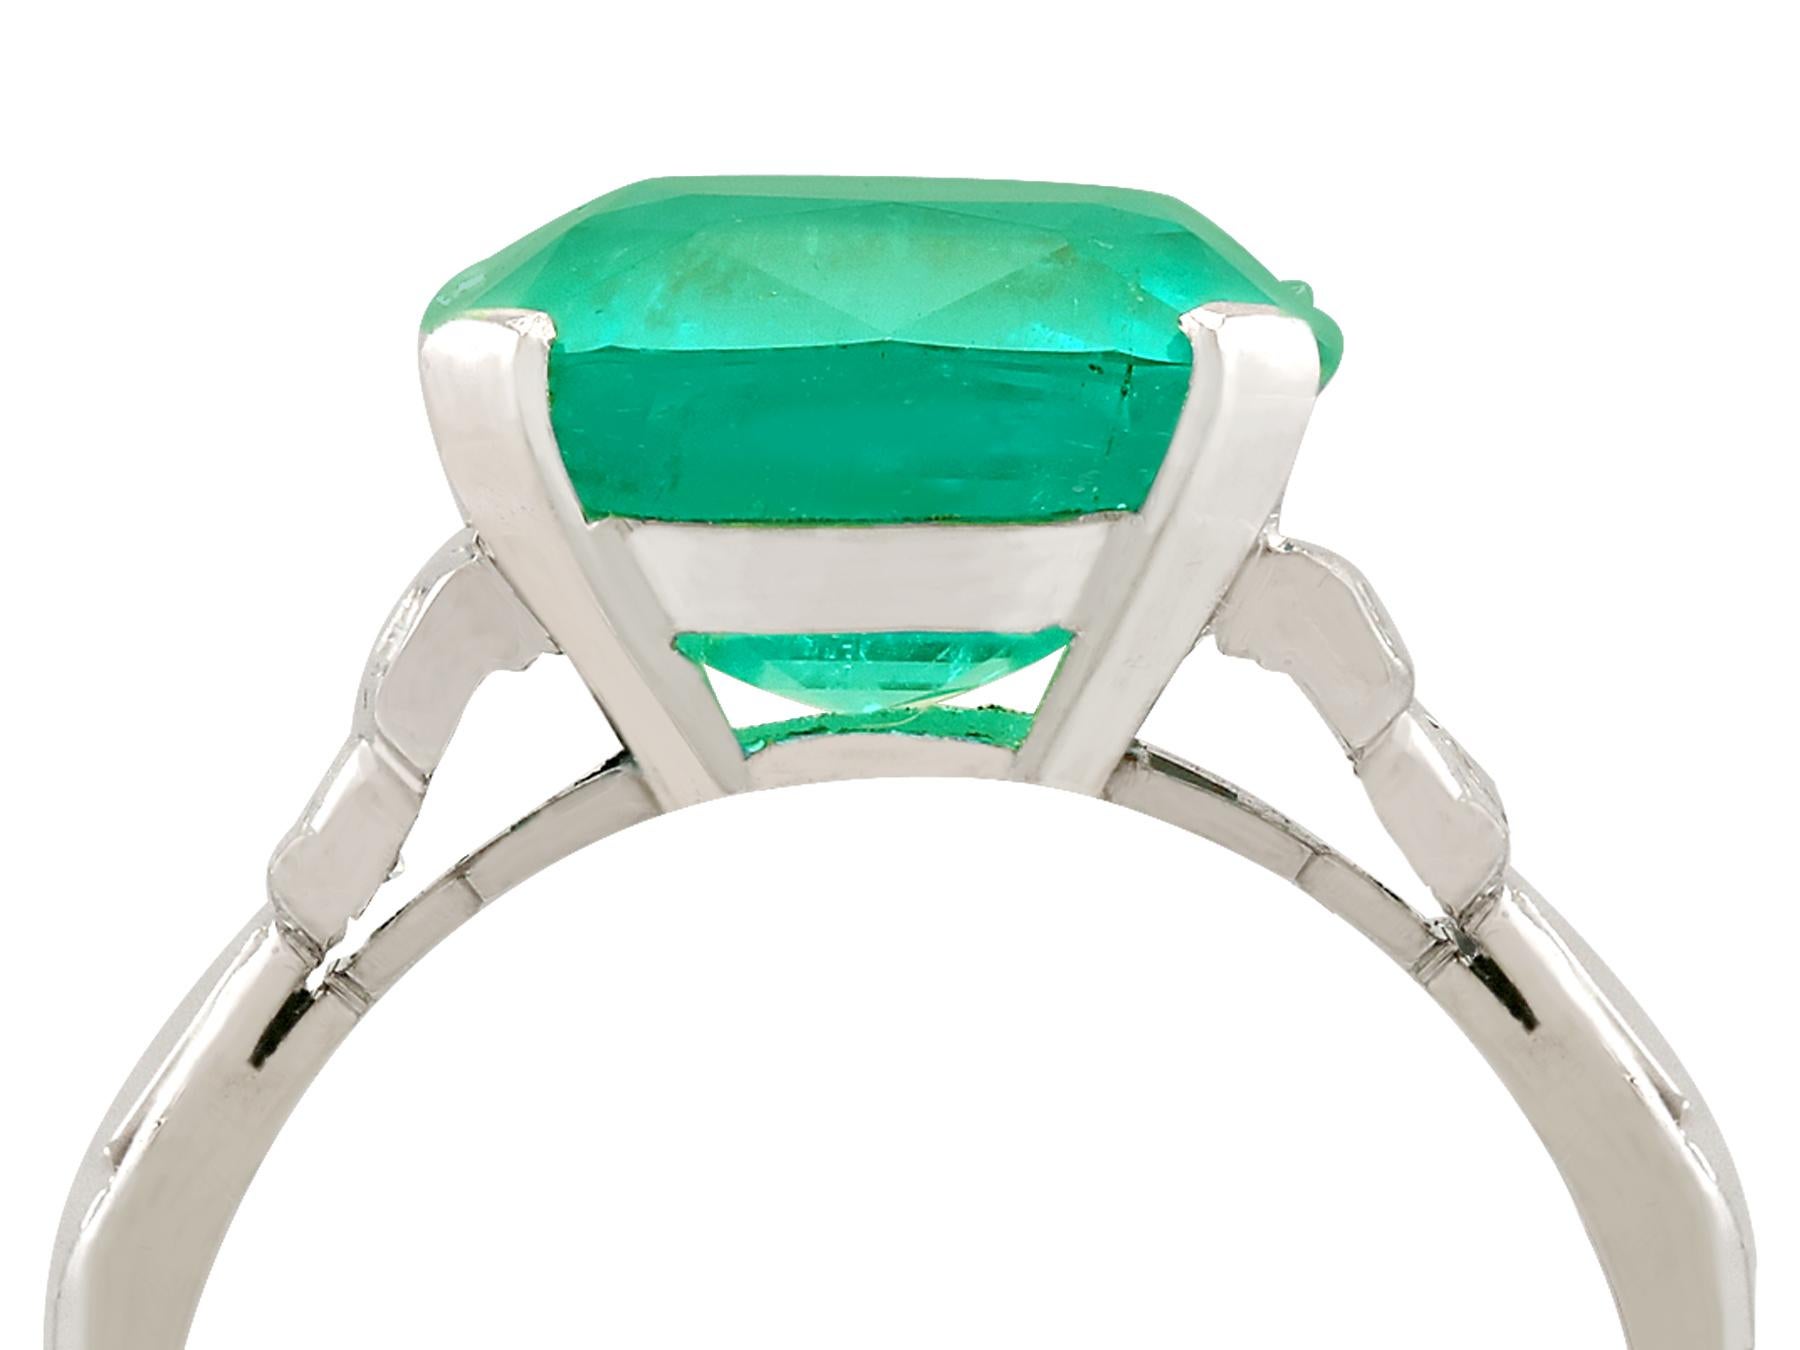 A stunning antique 5.00 carat Colombian emerald, 0.46 carat diamond and platinum cocktail ring; part of our diverse antique jewelry and estate jewelry collections.

This stunning, fine and impressive Colombian emerald and diamond ring has been